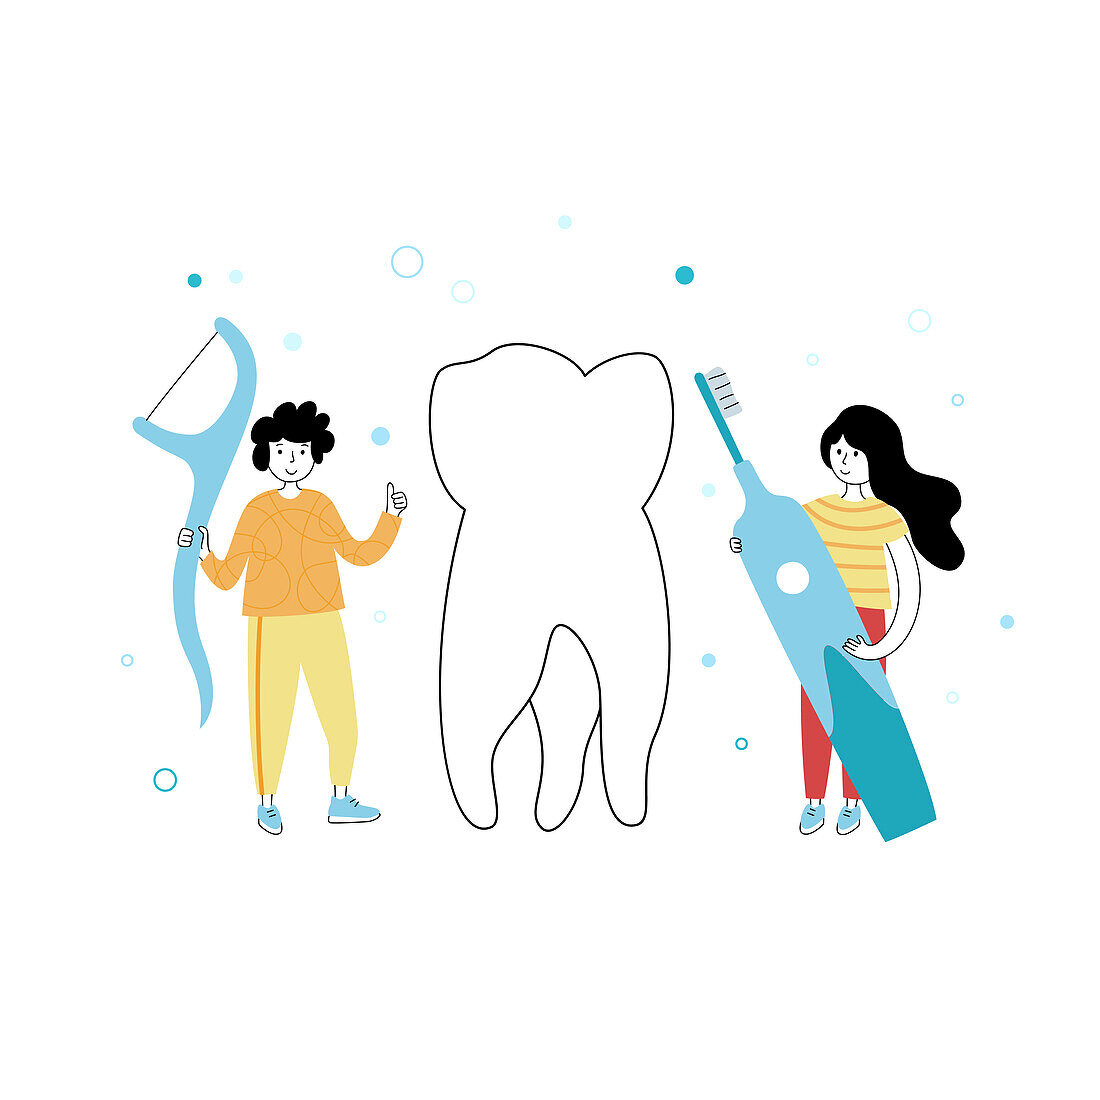 Teeth cleaning, conceptual illustration